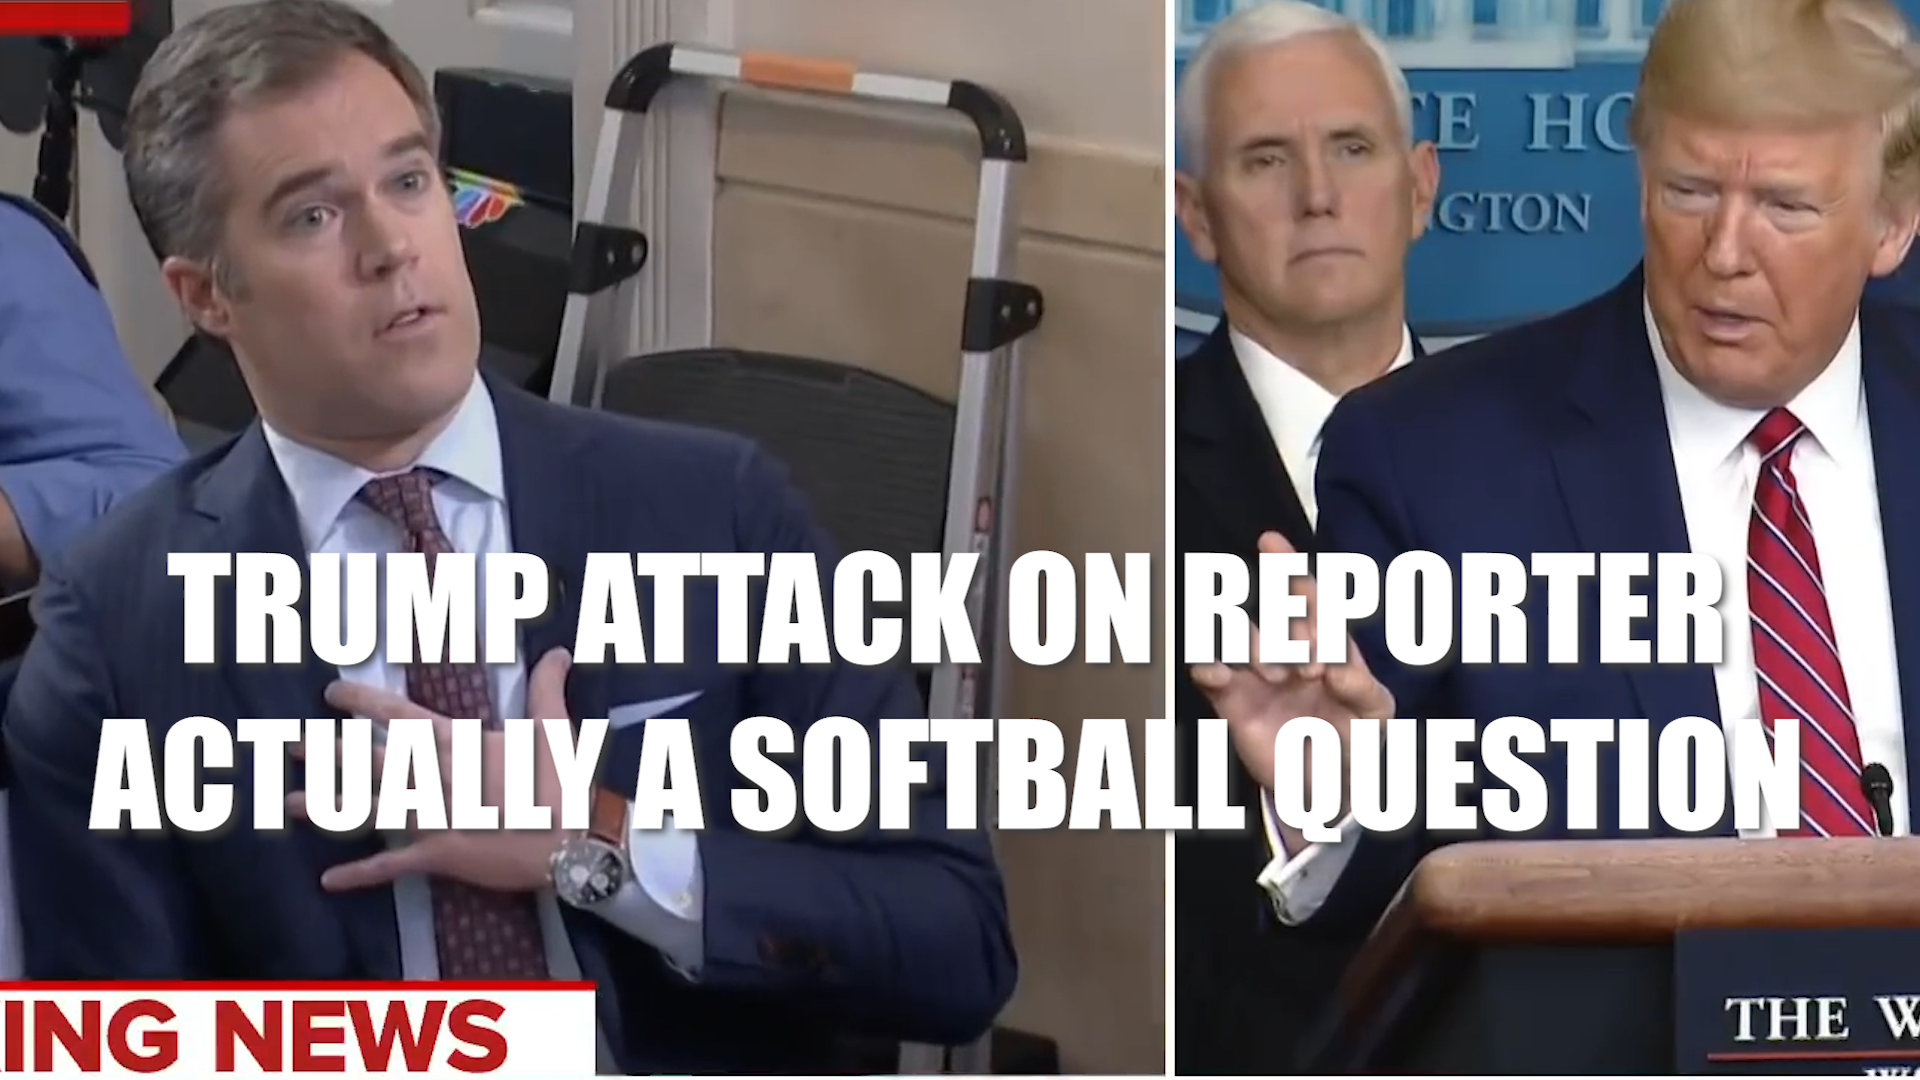 Video - President Trump Didn’t Recognize a Classic Reporter Softball Question